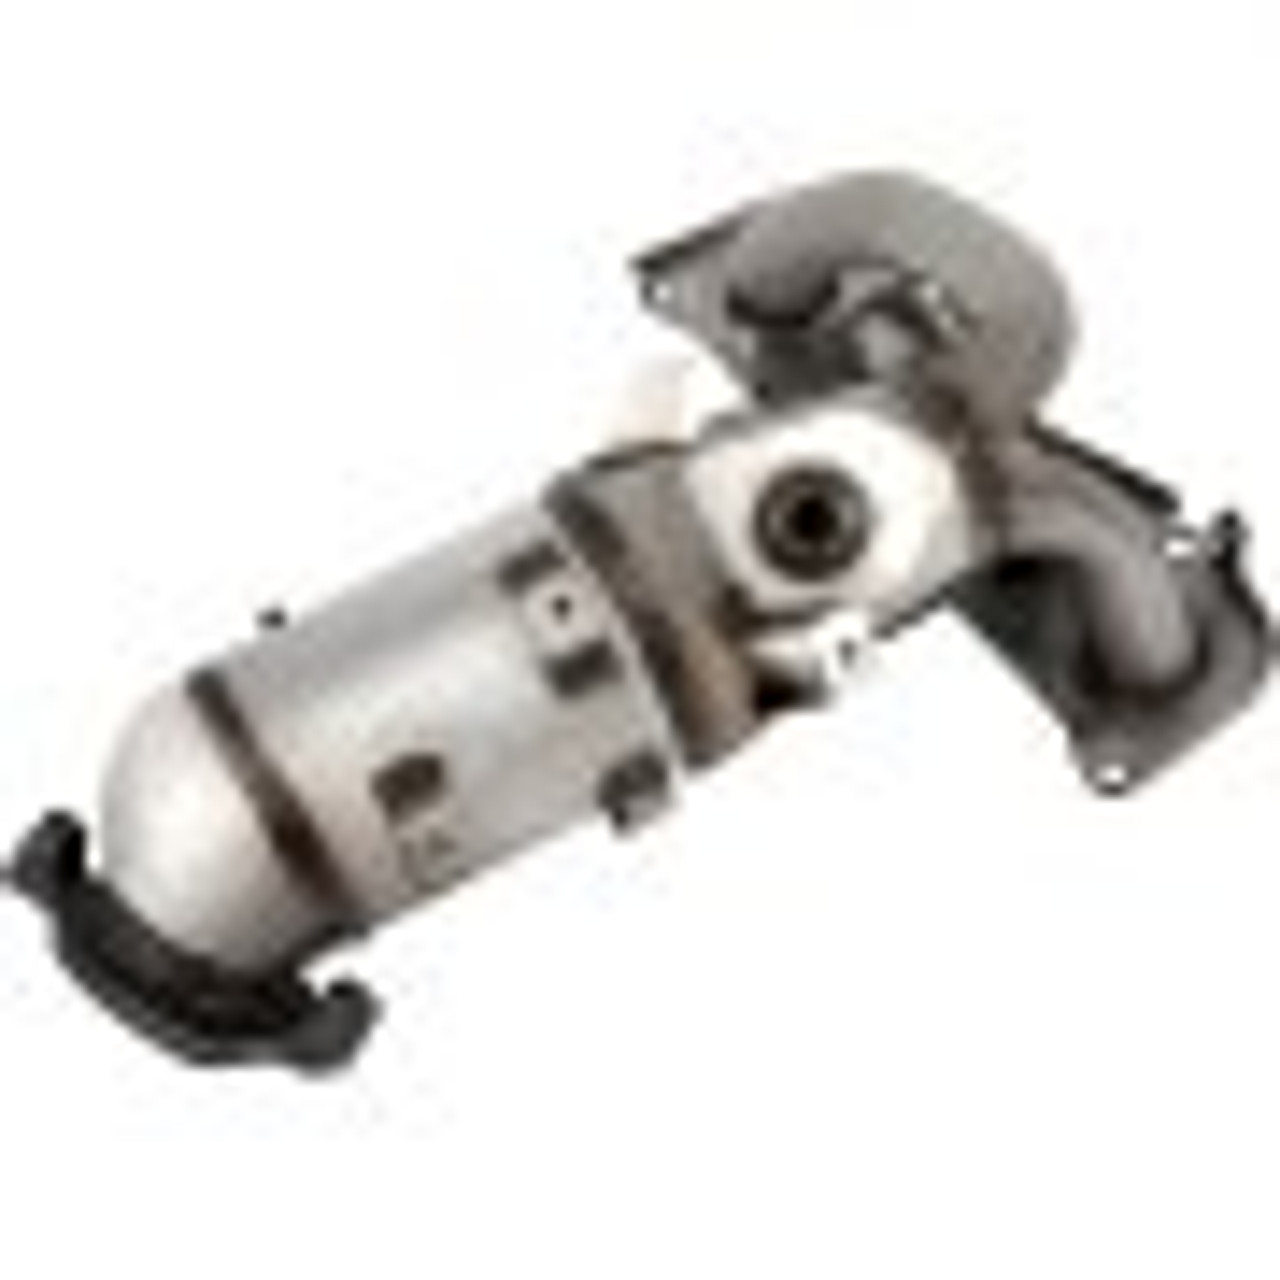 Catalytic Converter Compatible with 2002, 2003, 2004, 2005, 2006 Toyota Camry & Solara 2.4L, High Flow Cat Stainless Steel Cat Converter with Gasket Kit Exhaust Manifold (OBD III Compliant)